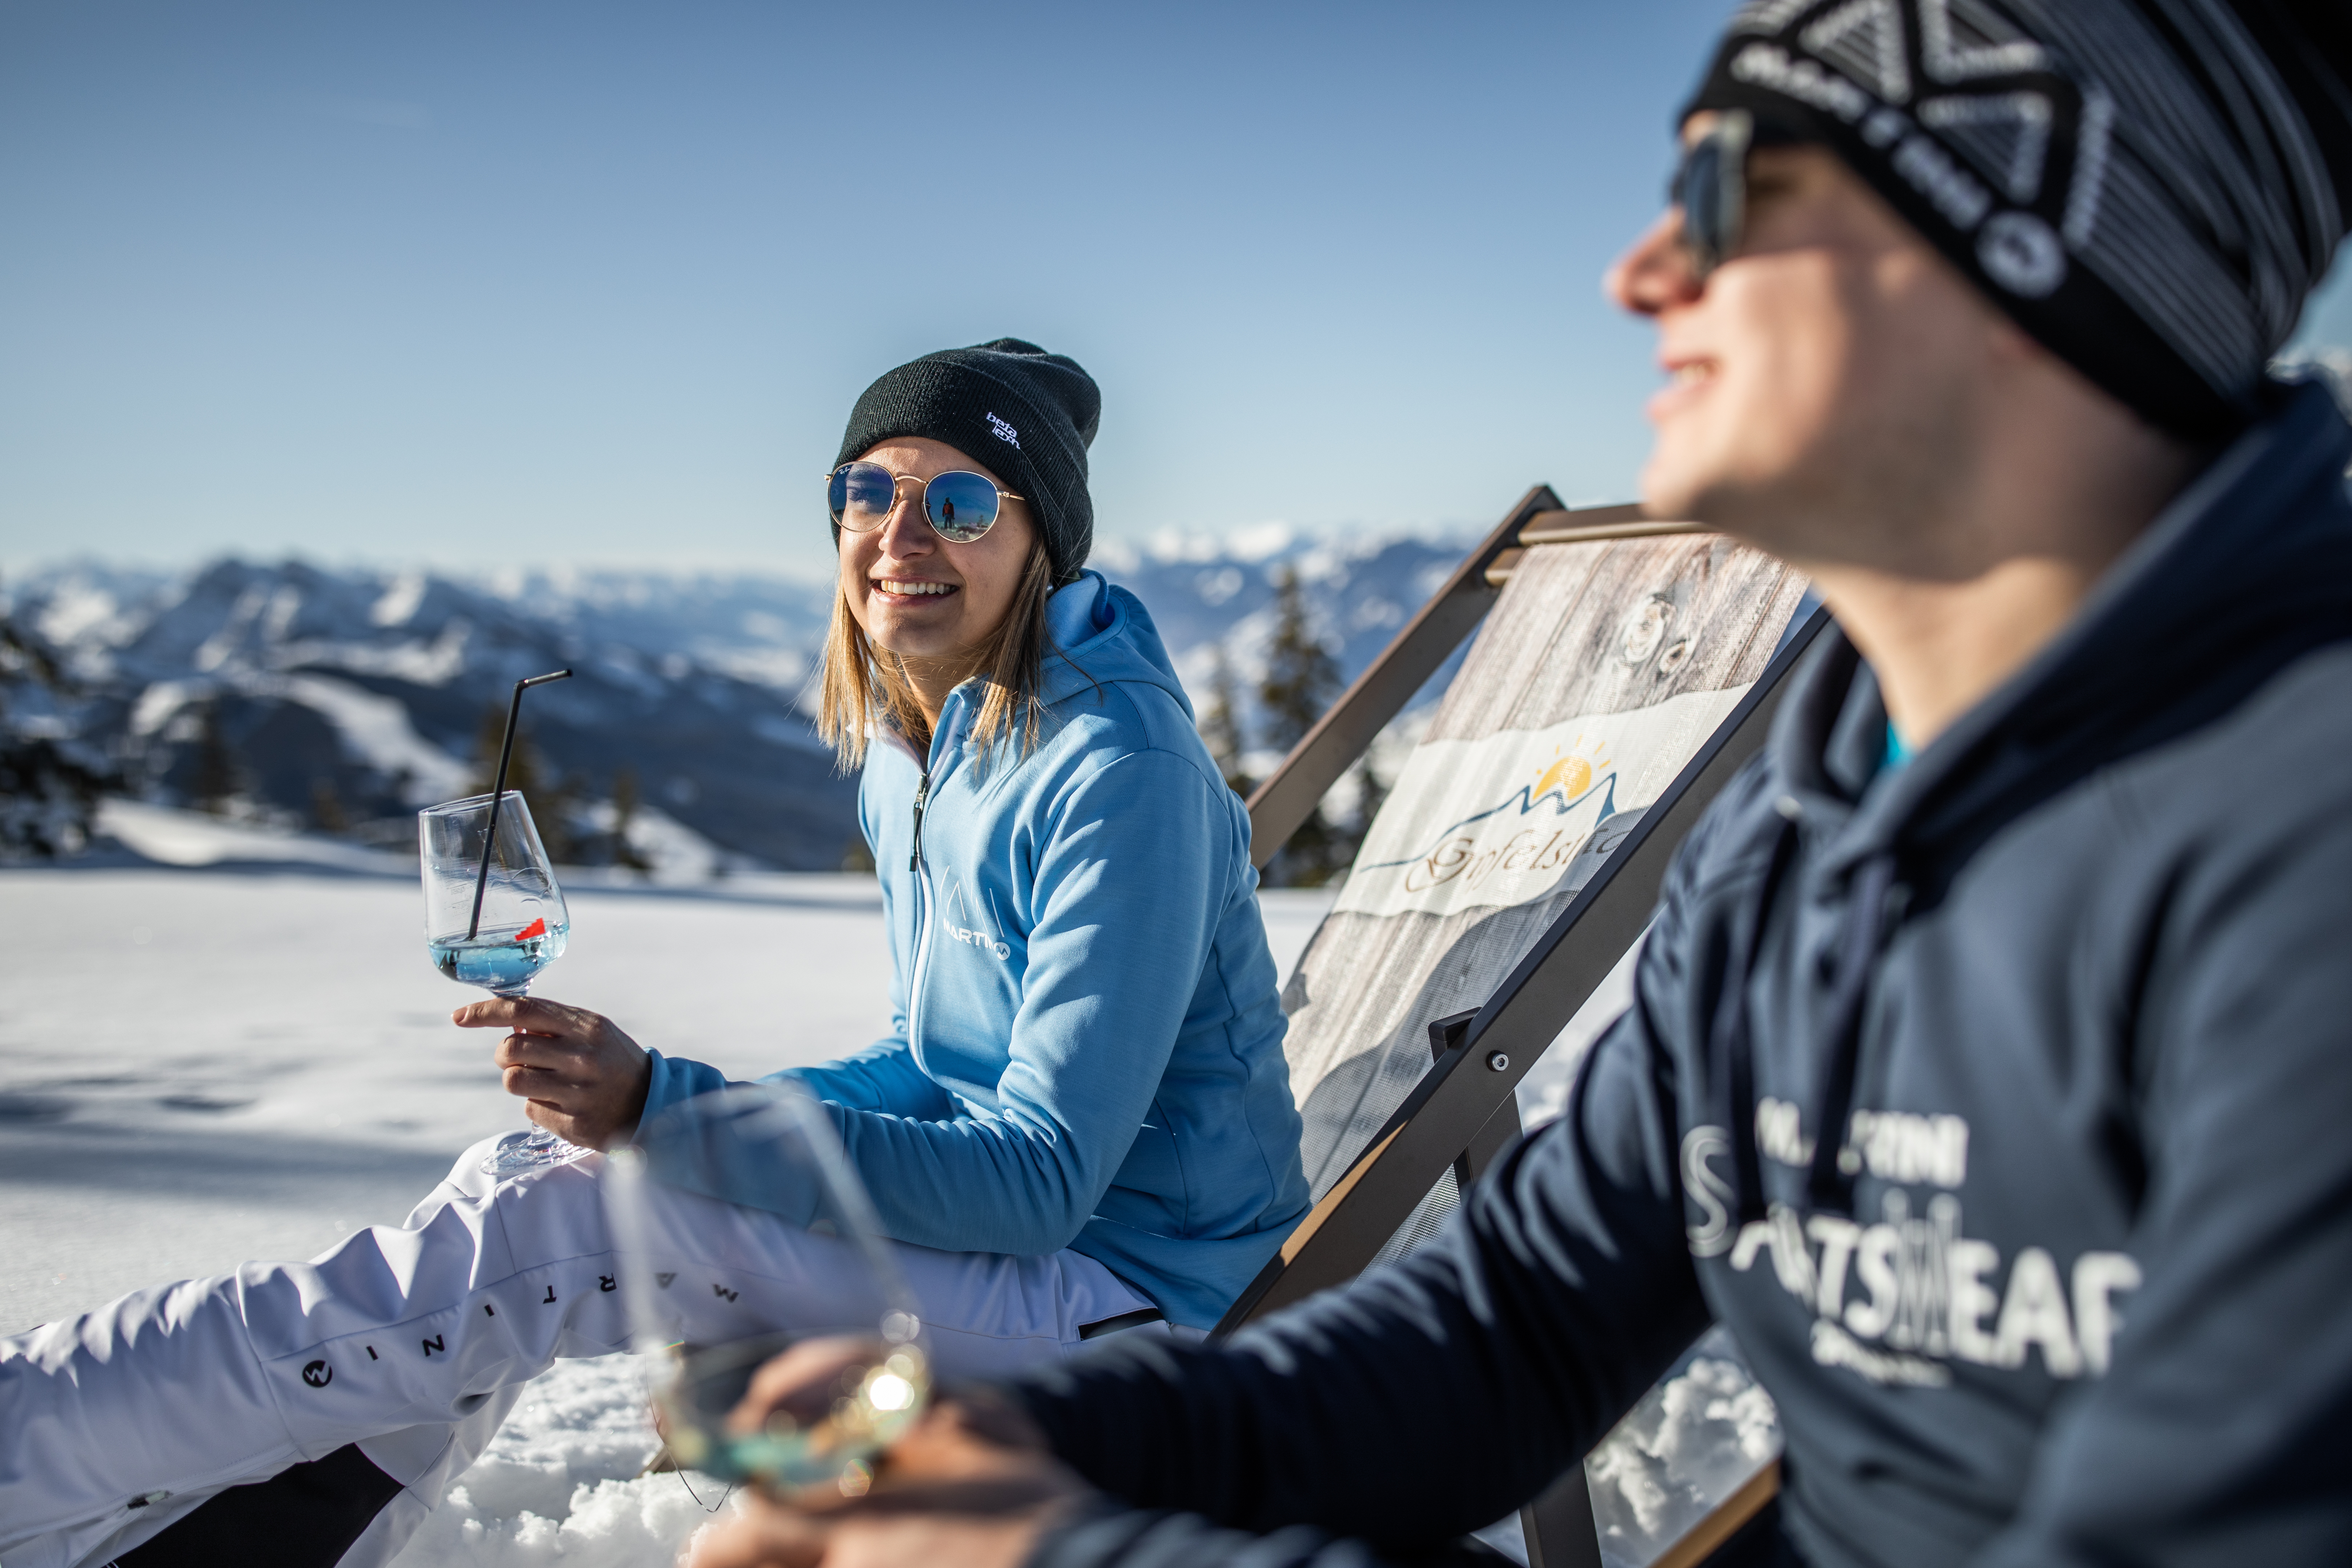 2020-01-21-Sportwelt-Skishooting-by-Michael-Groessinger-_A2A7582